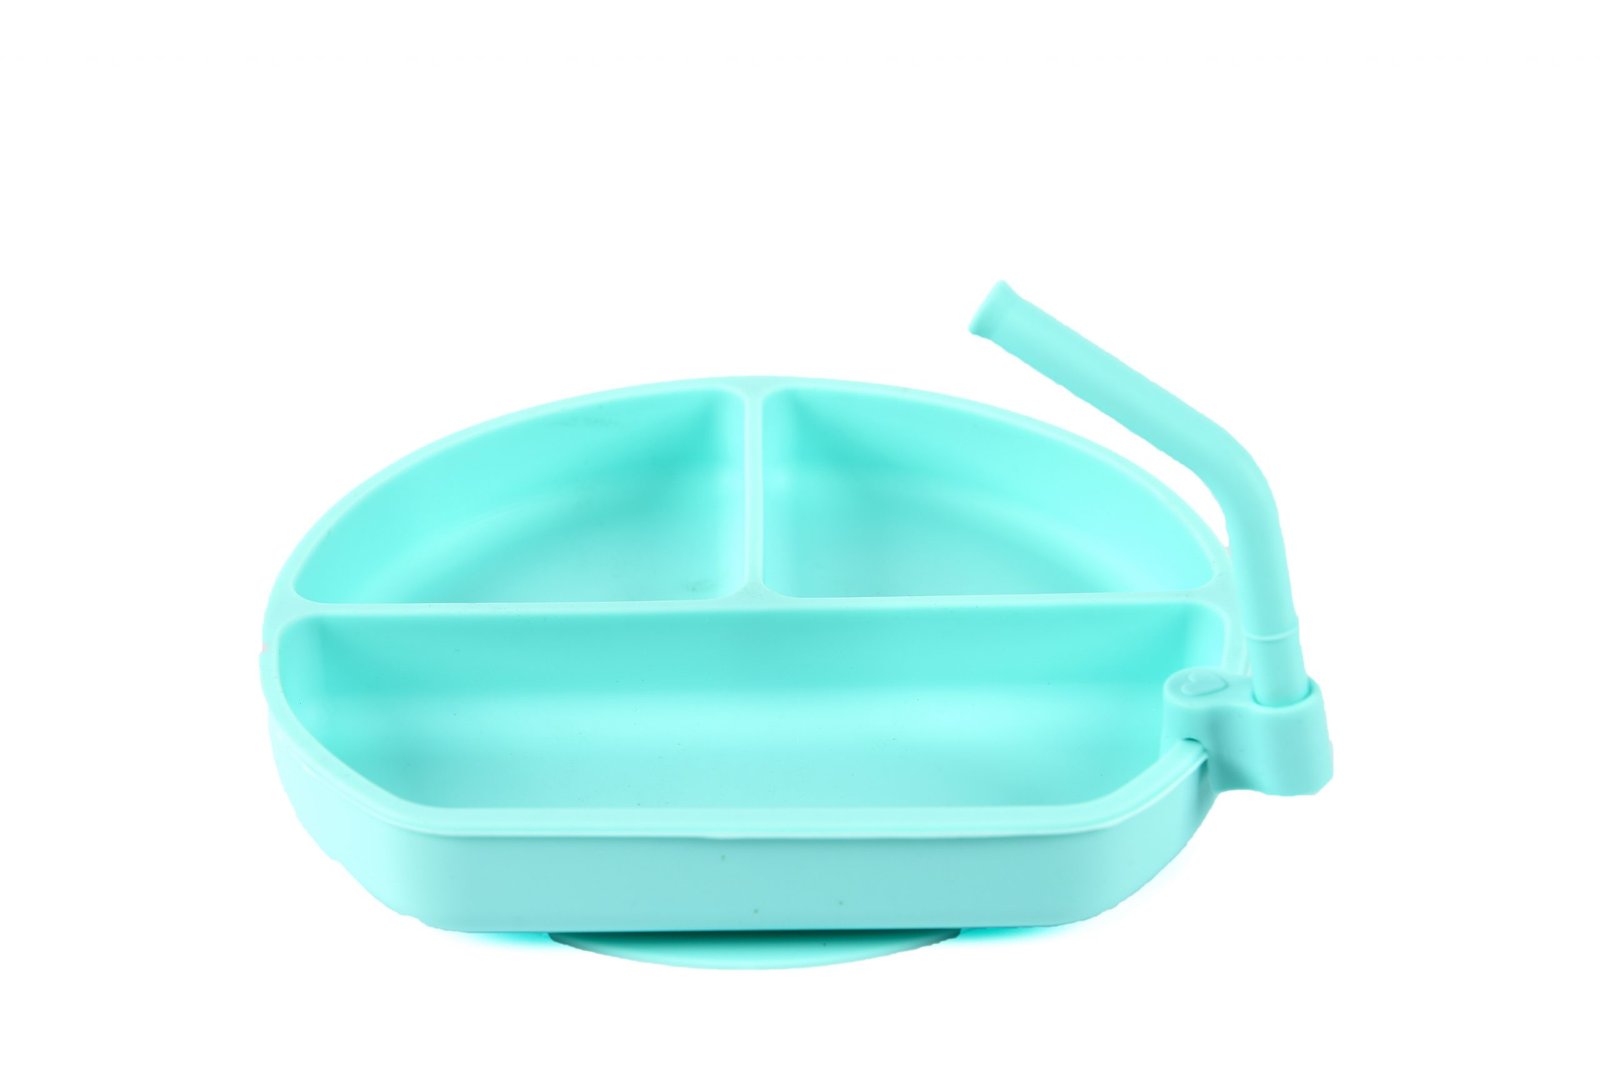 Wholesale 8 Pack silicone baby feeding set Manufacturer and Supplier